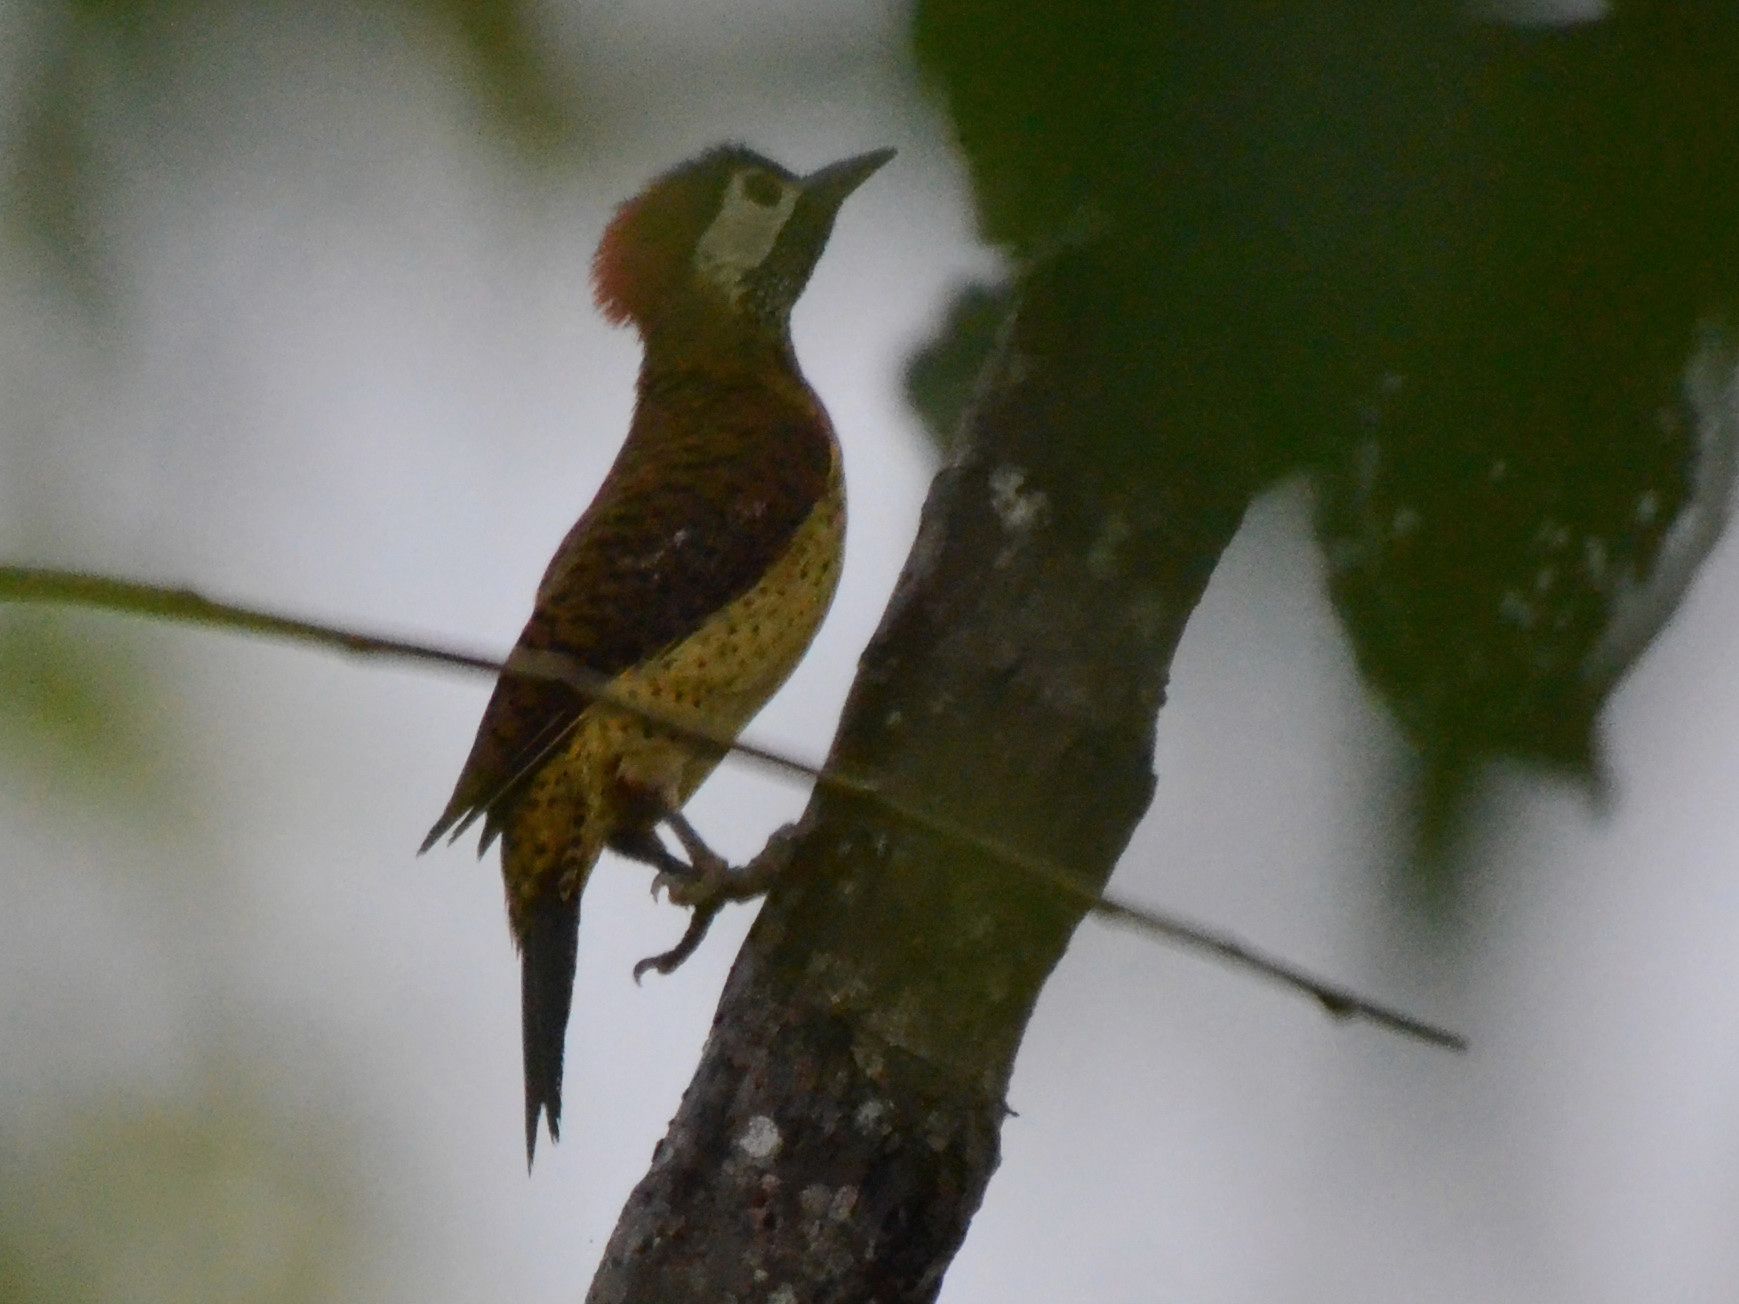 Click picture to see more Spot-breasted Woodpeckers.